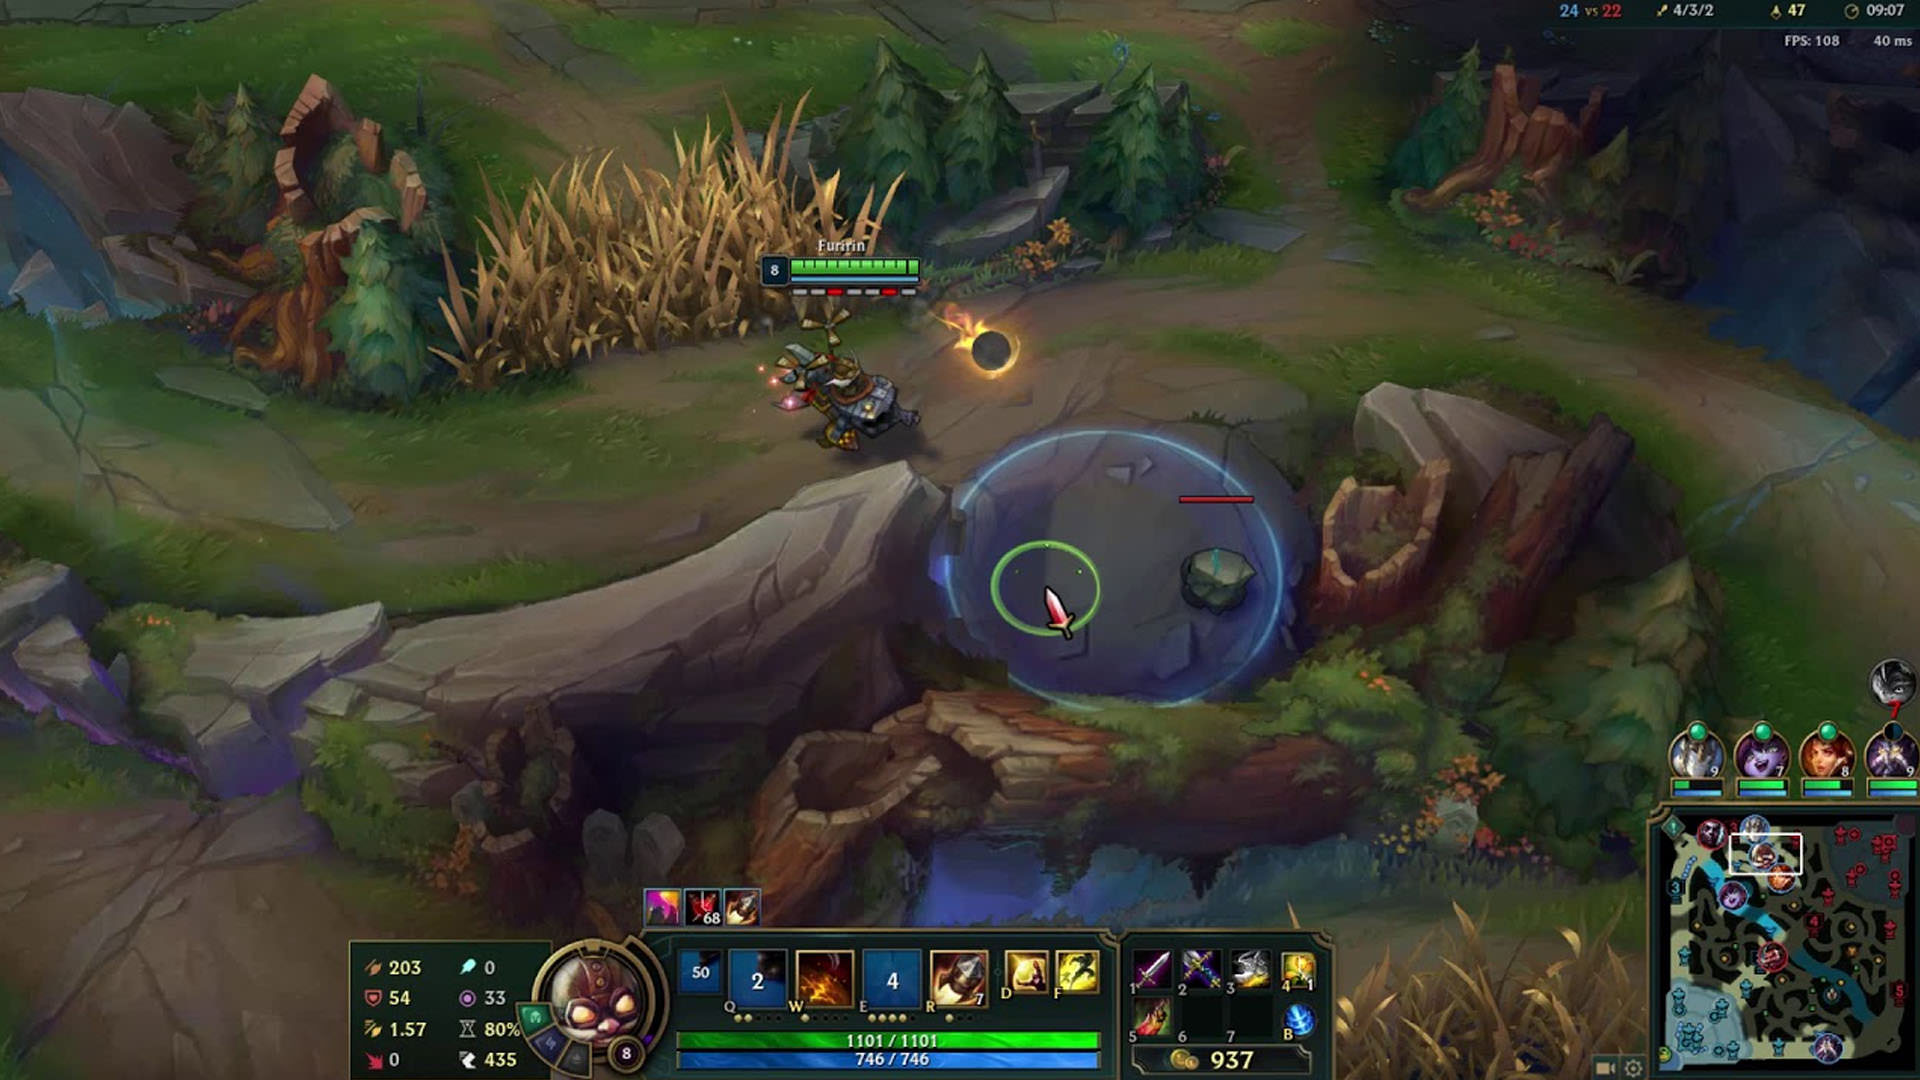 Gameplay of Moba game League of Legends